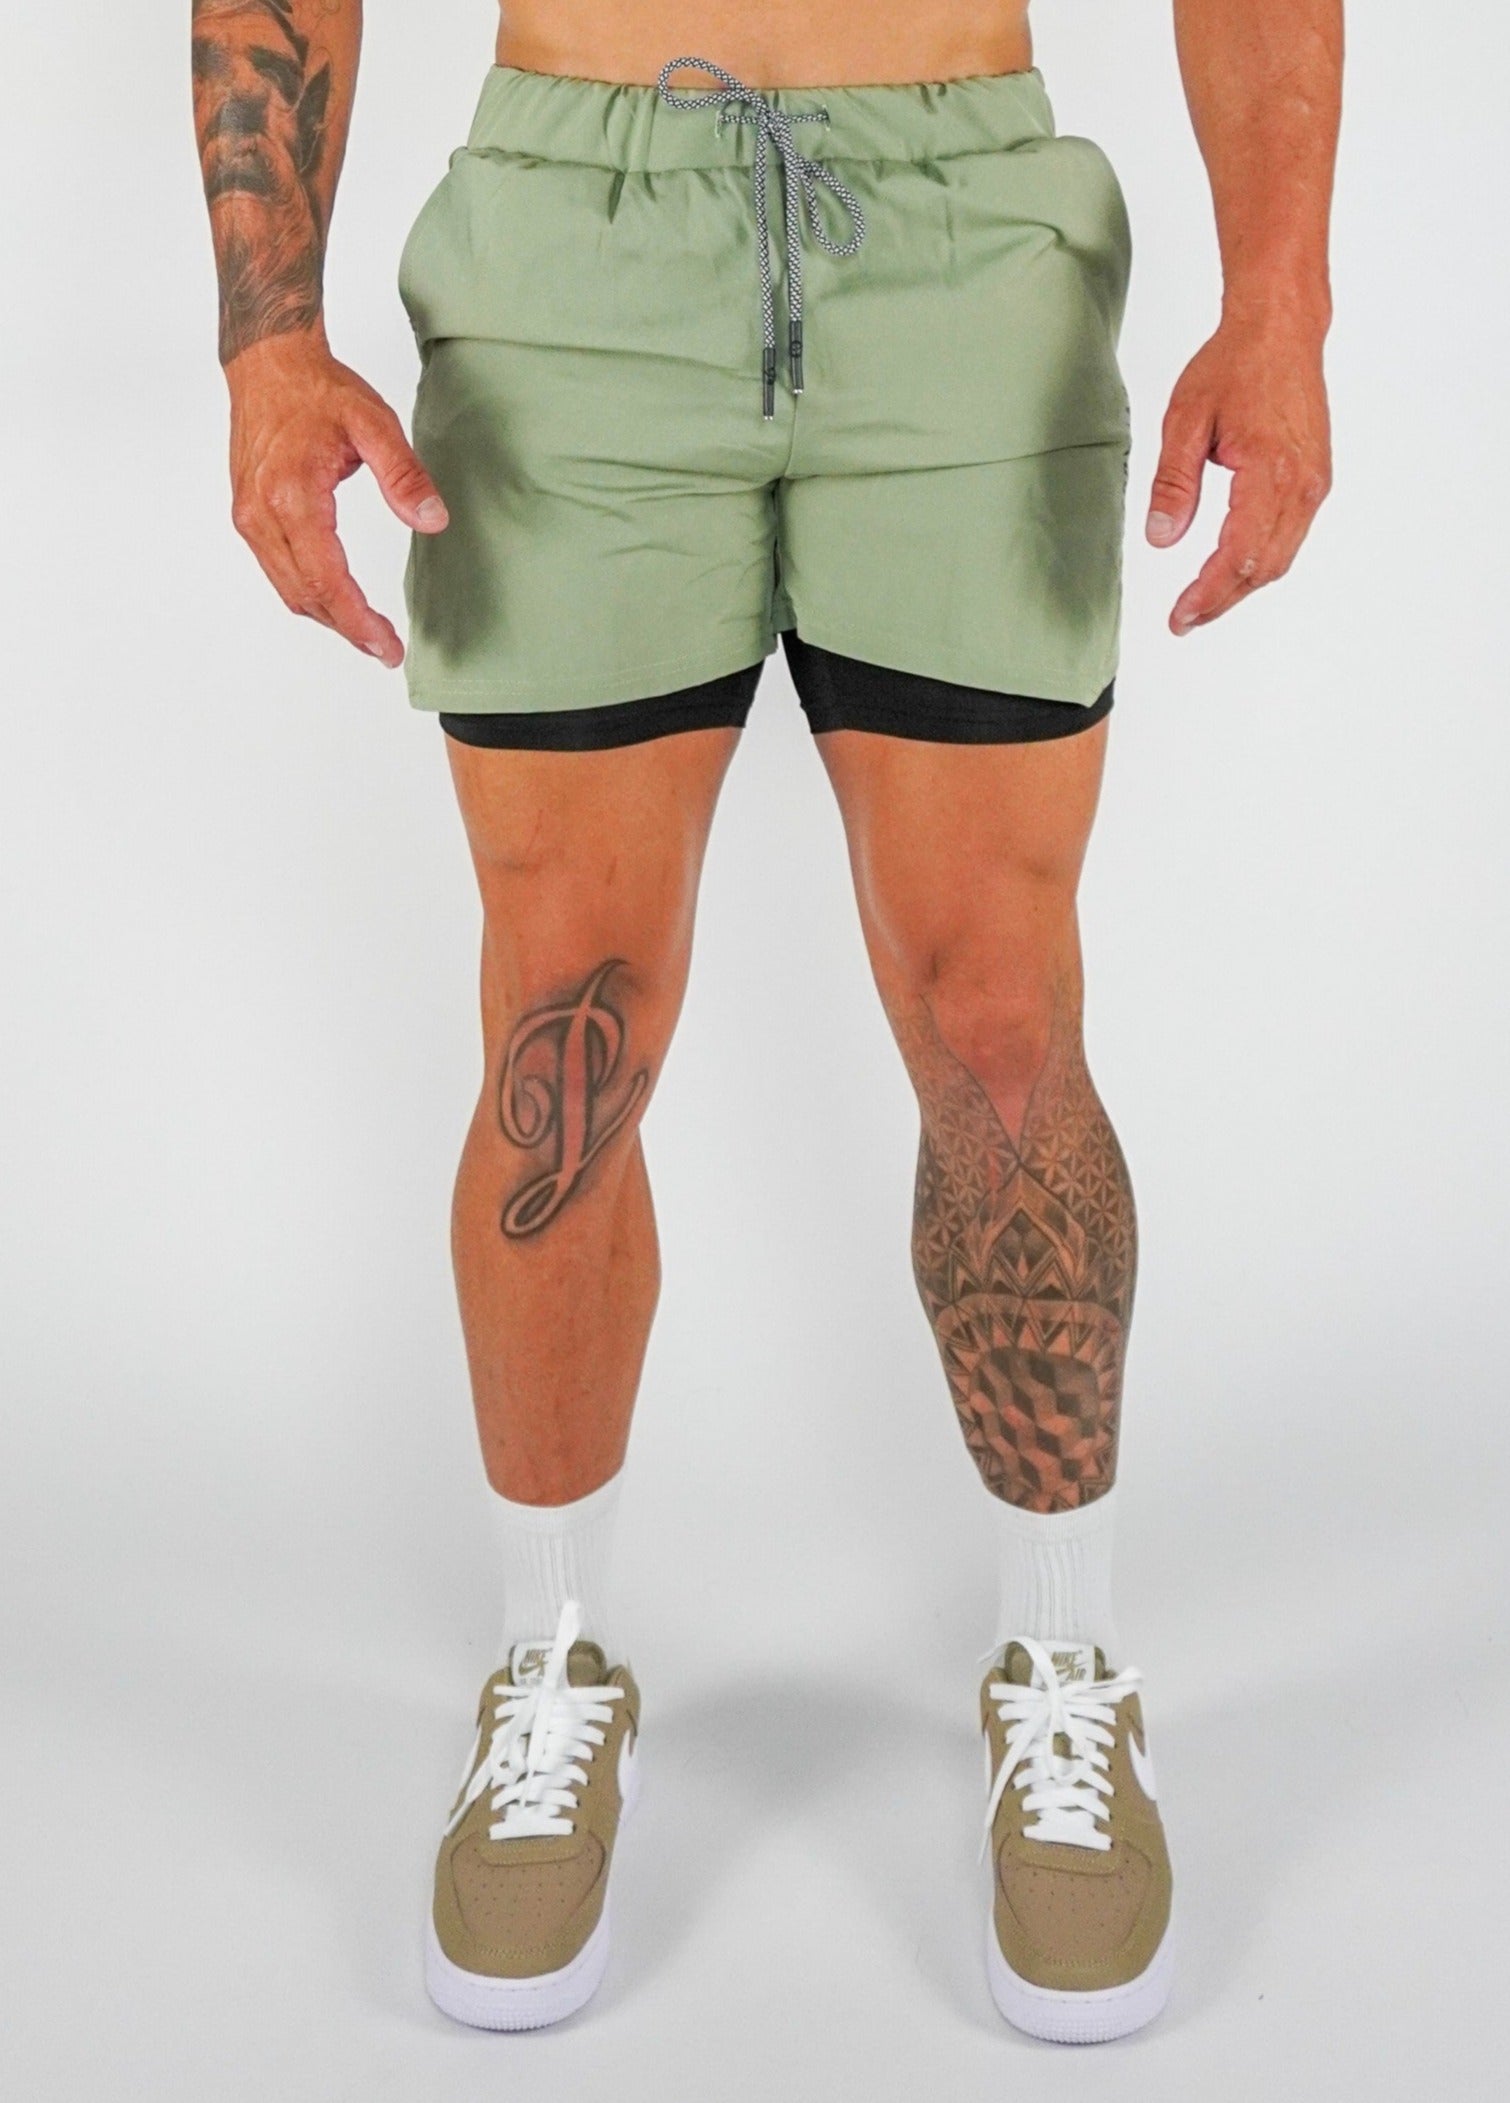 Culture 2-IN-1 Shorts - Matcha - GYMROOS